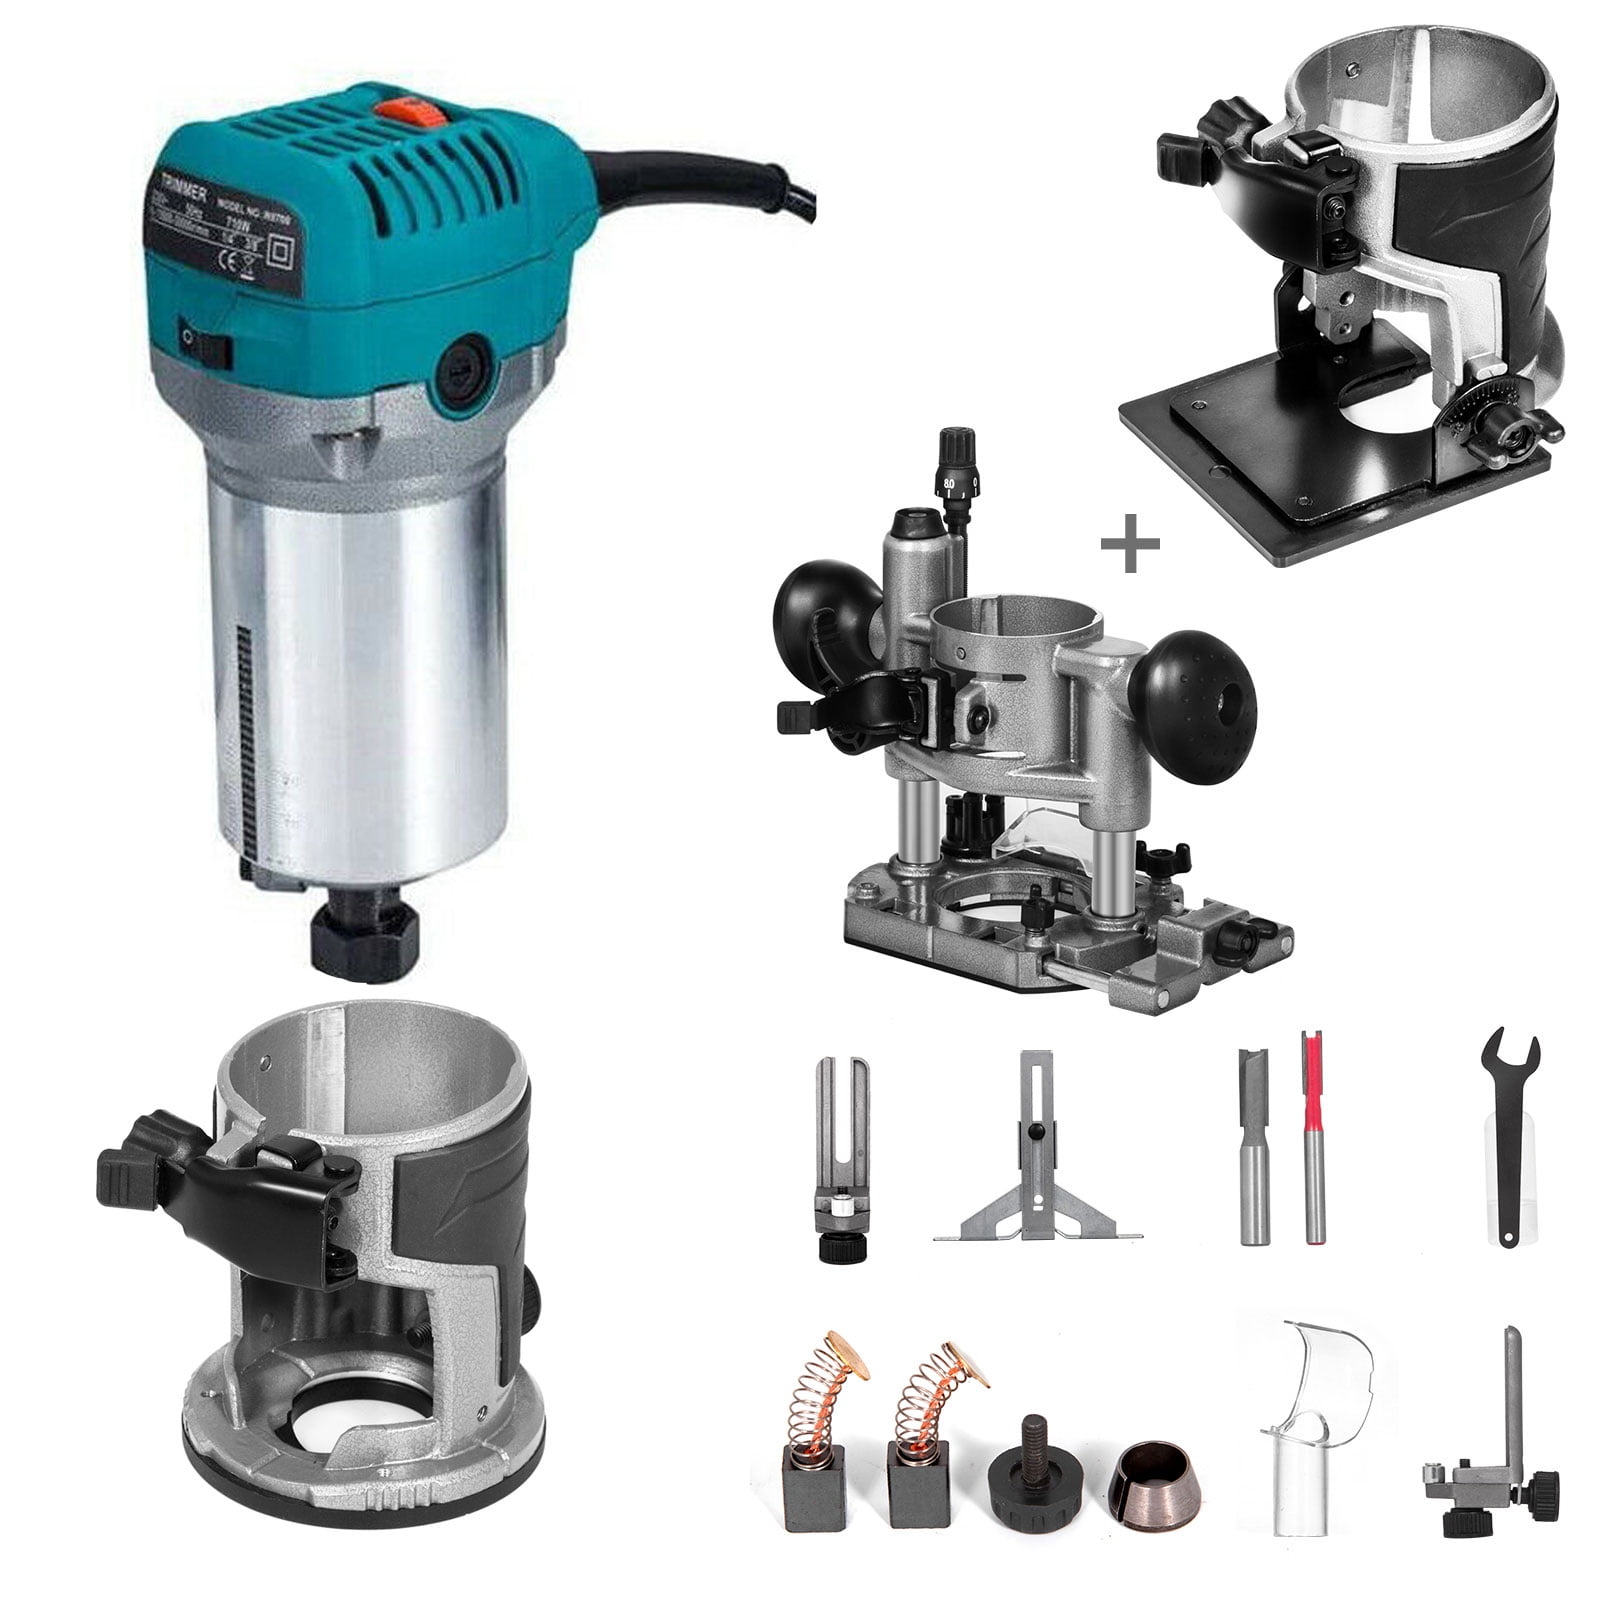 VEVORbrand Wood Router Kit 1.25 HP Max Torque 30,000 RPM Variable Speed  Router With Fixed Base, Plunge Base and Tilt Base For Woodworking   Furniture Manufacturing